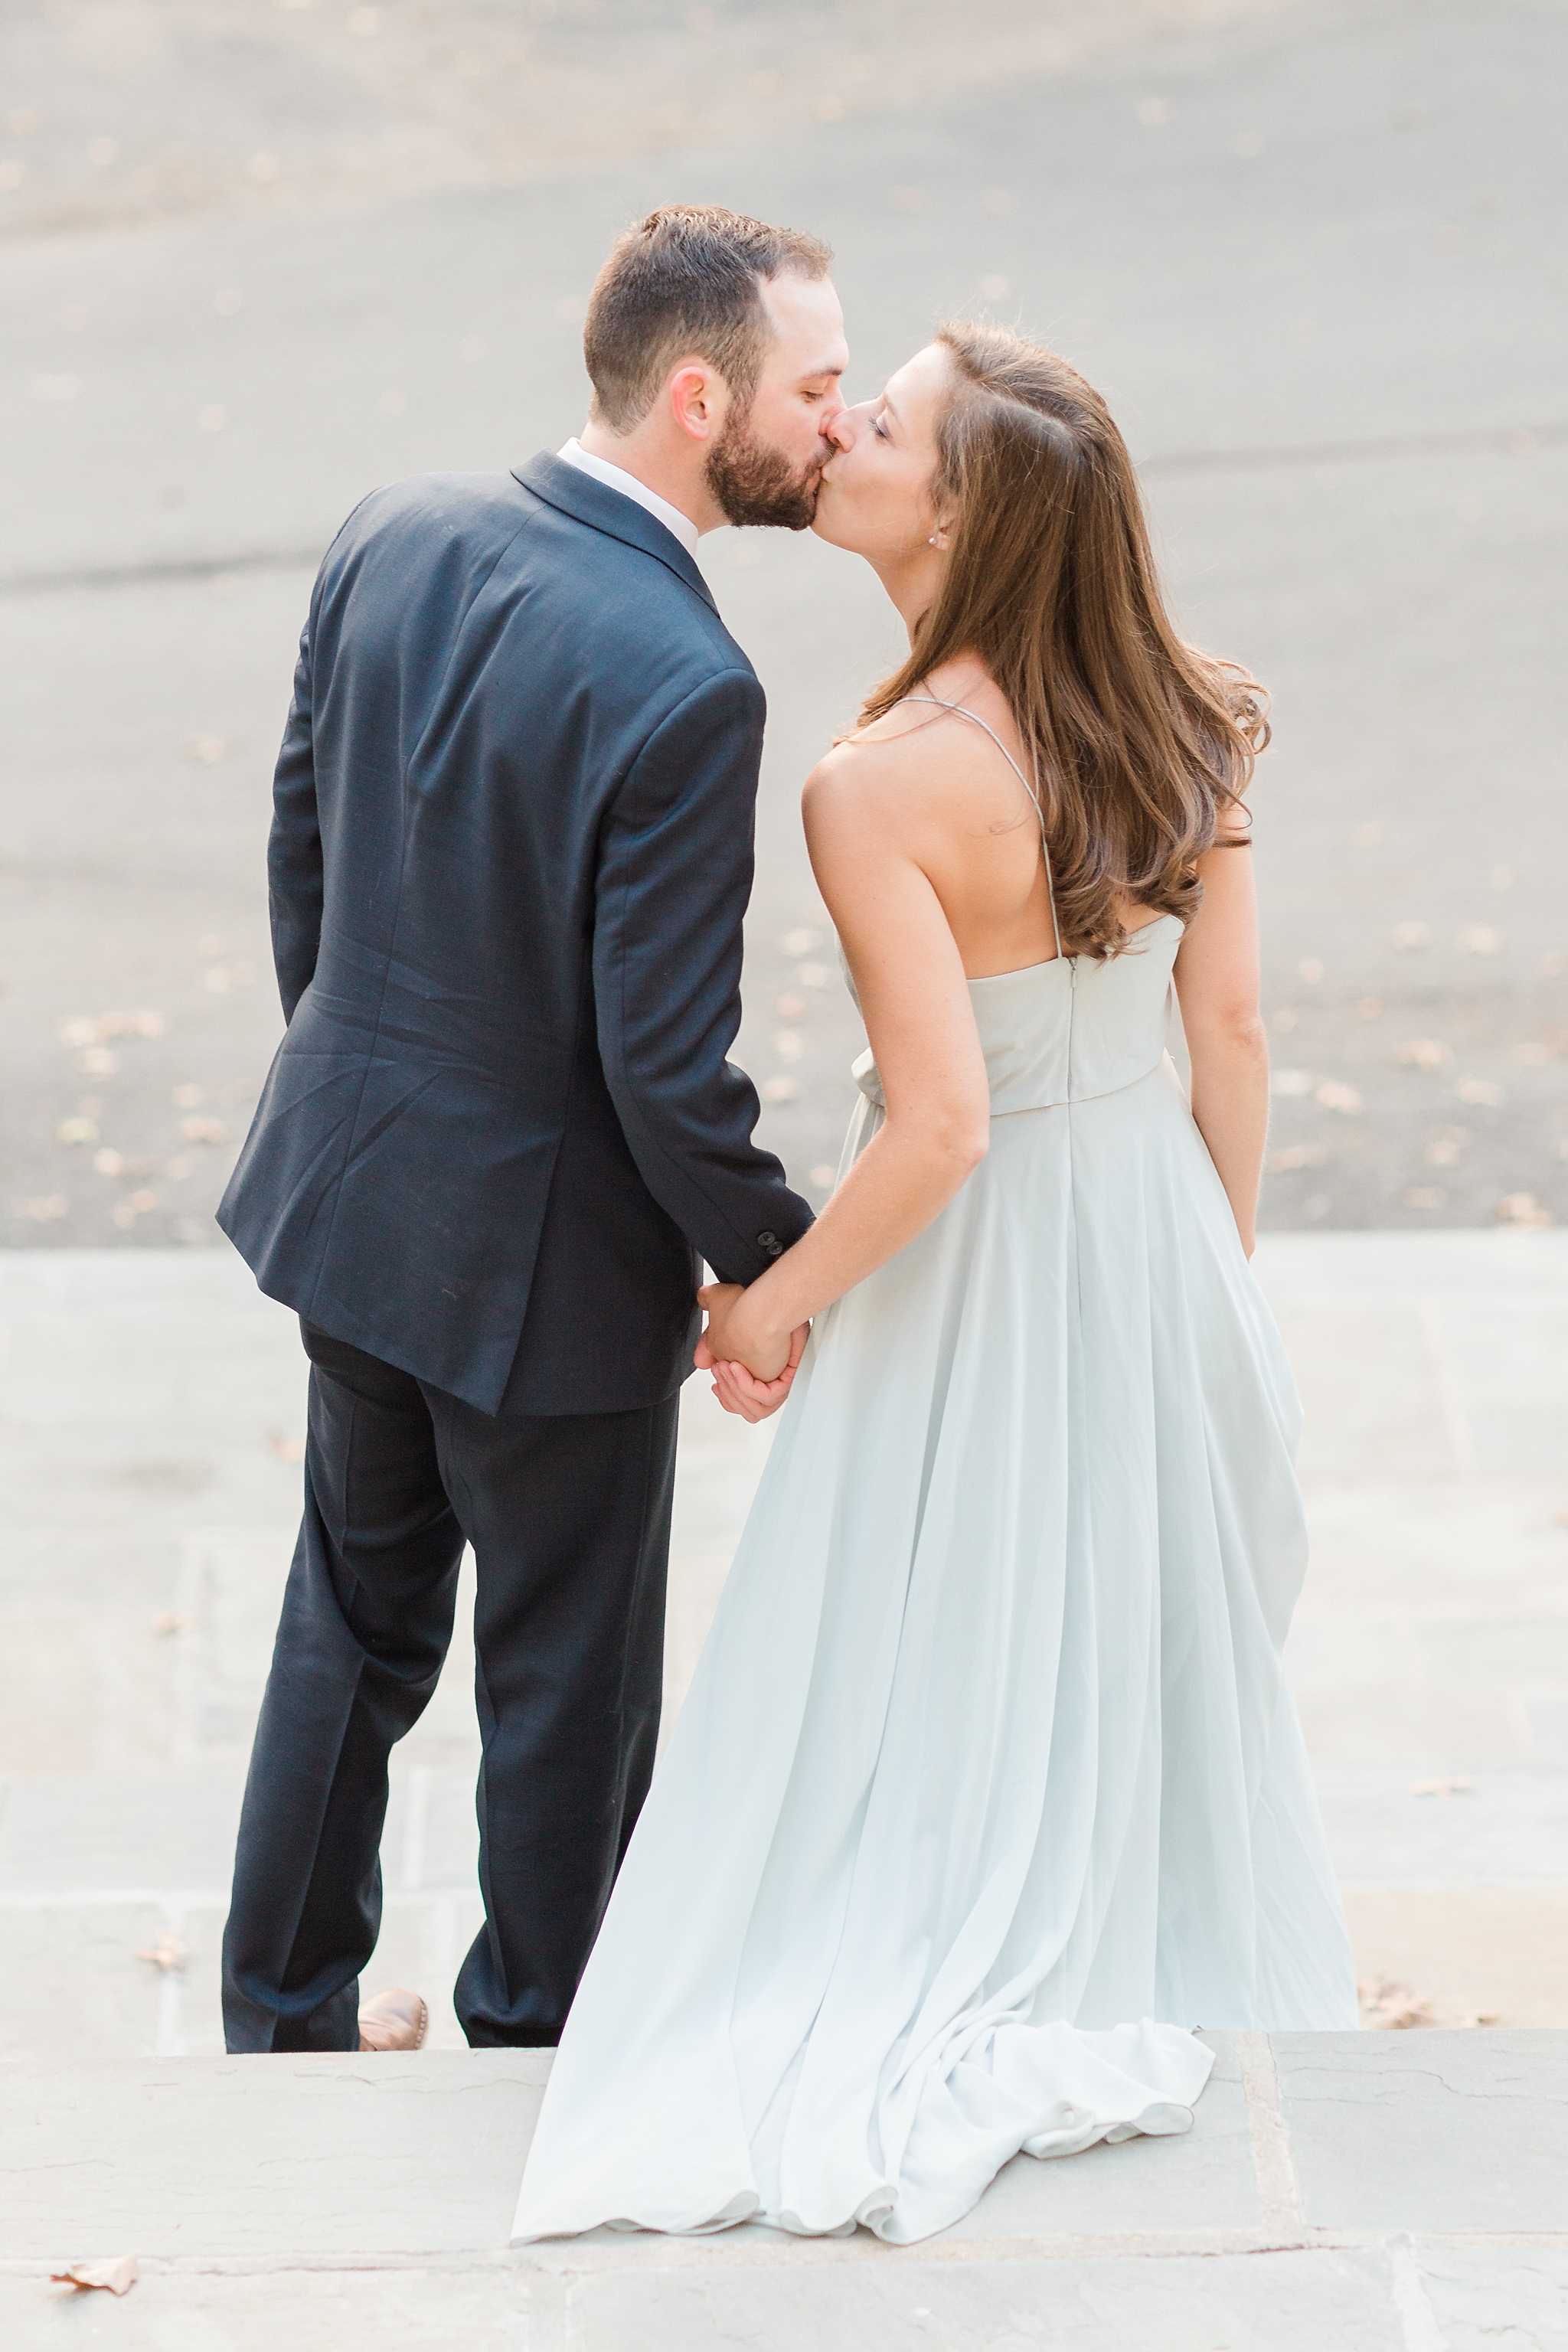 A romantic garden engagement session photographed in Warrenton, VA by DC wedding photographer, Alicia Lacey.